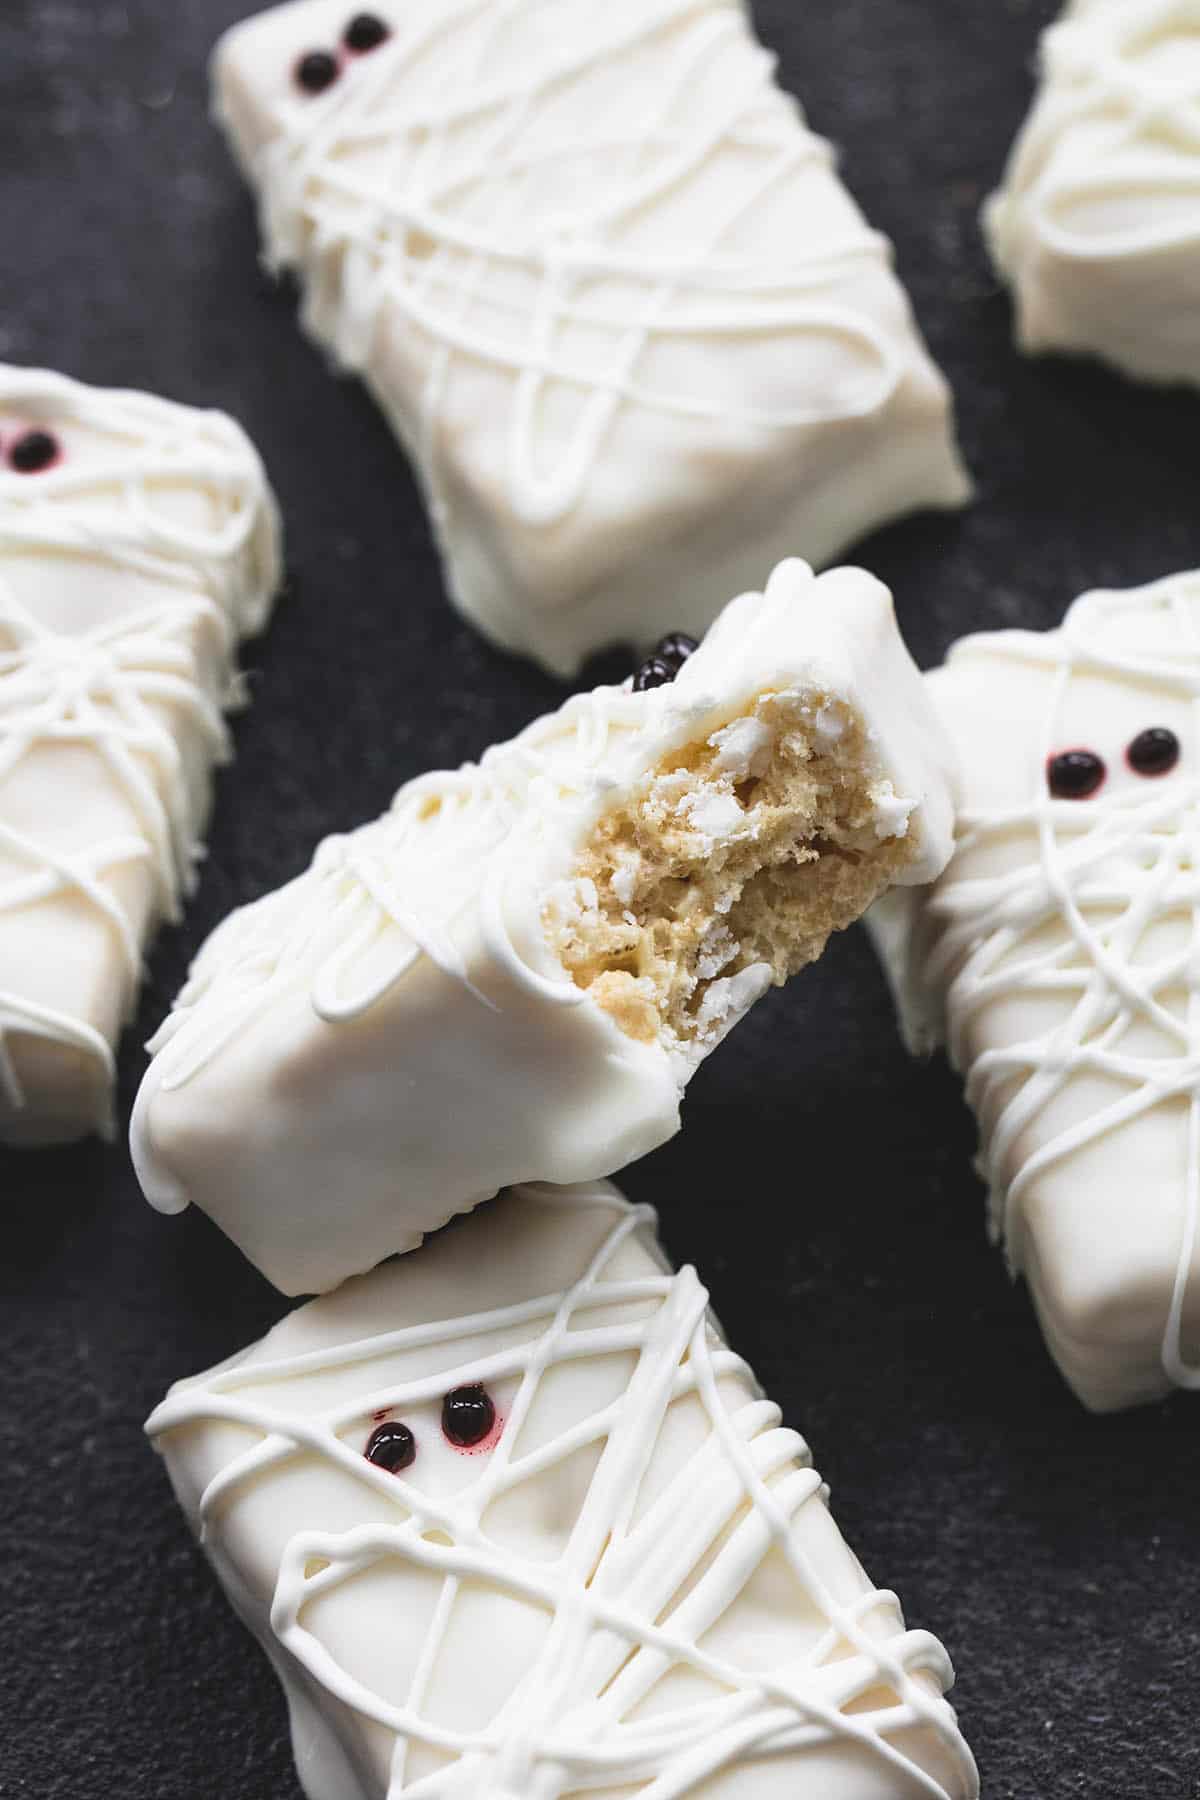 a rice krispie treat mummy leaning upward on more mummies with a bite missing.